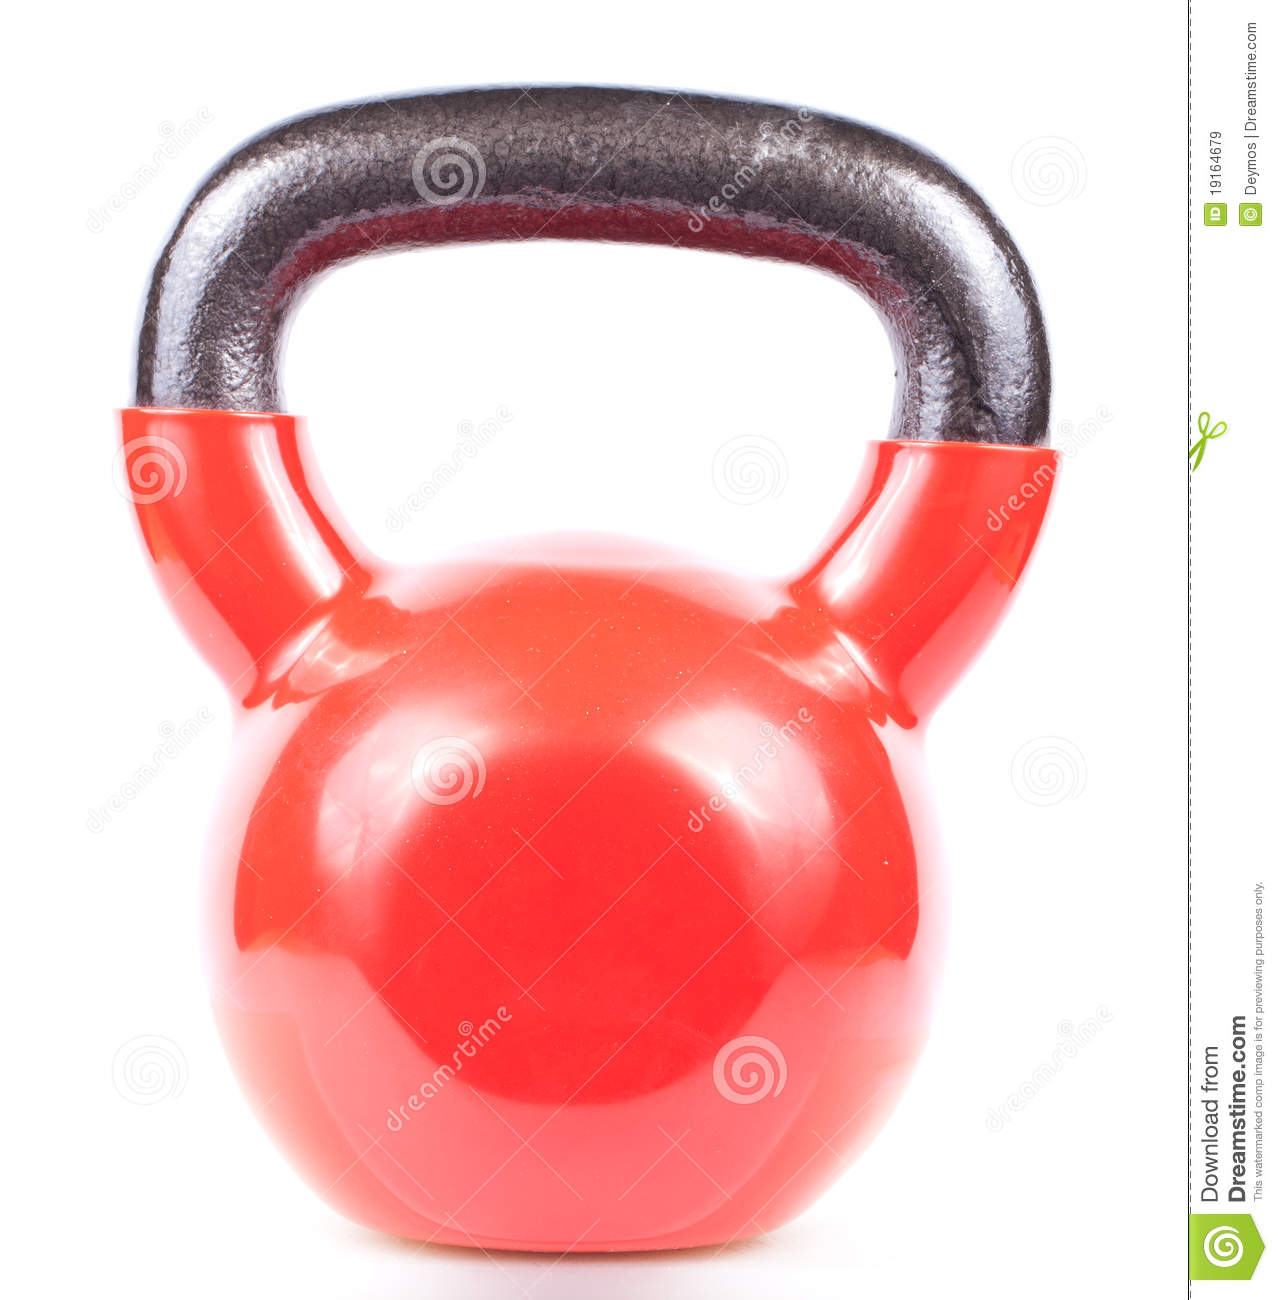 Red Kettlebell Isolated On White Royalty Free Stock Images   Image